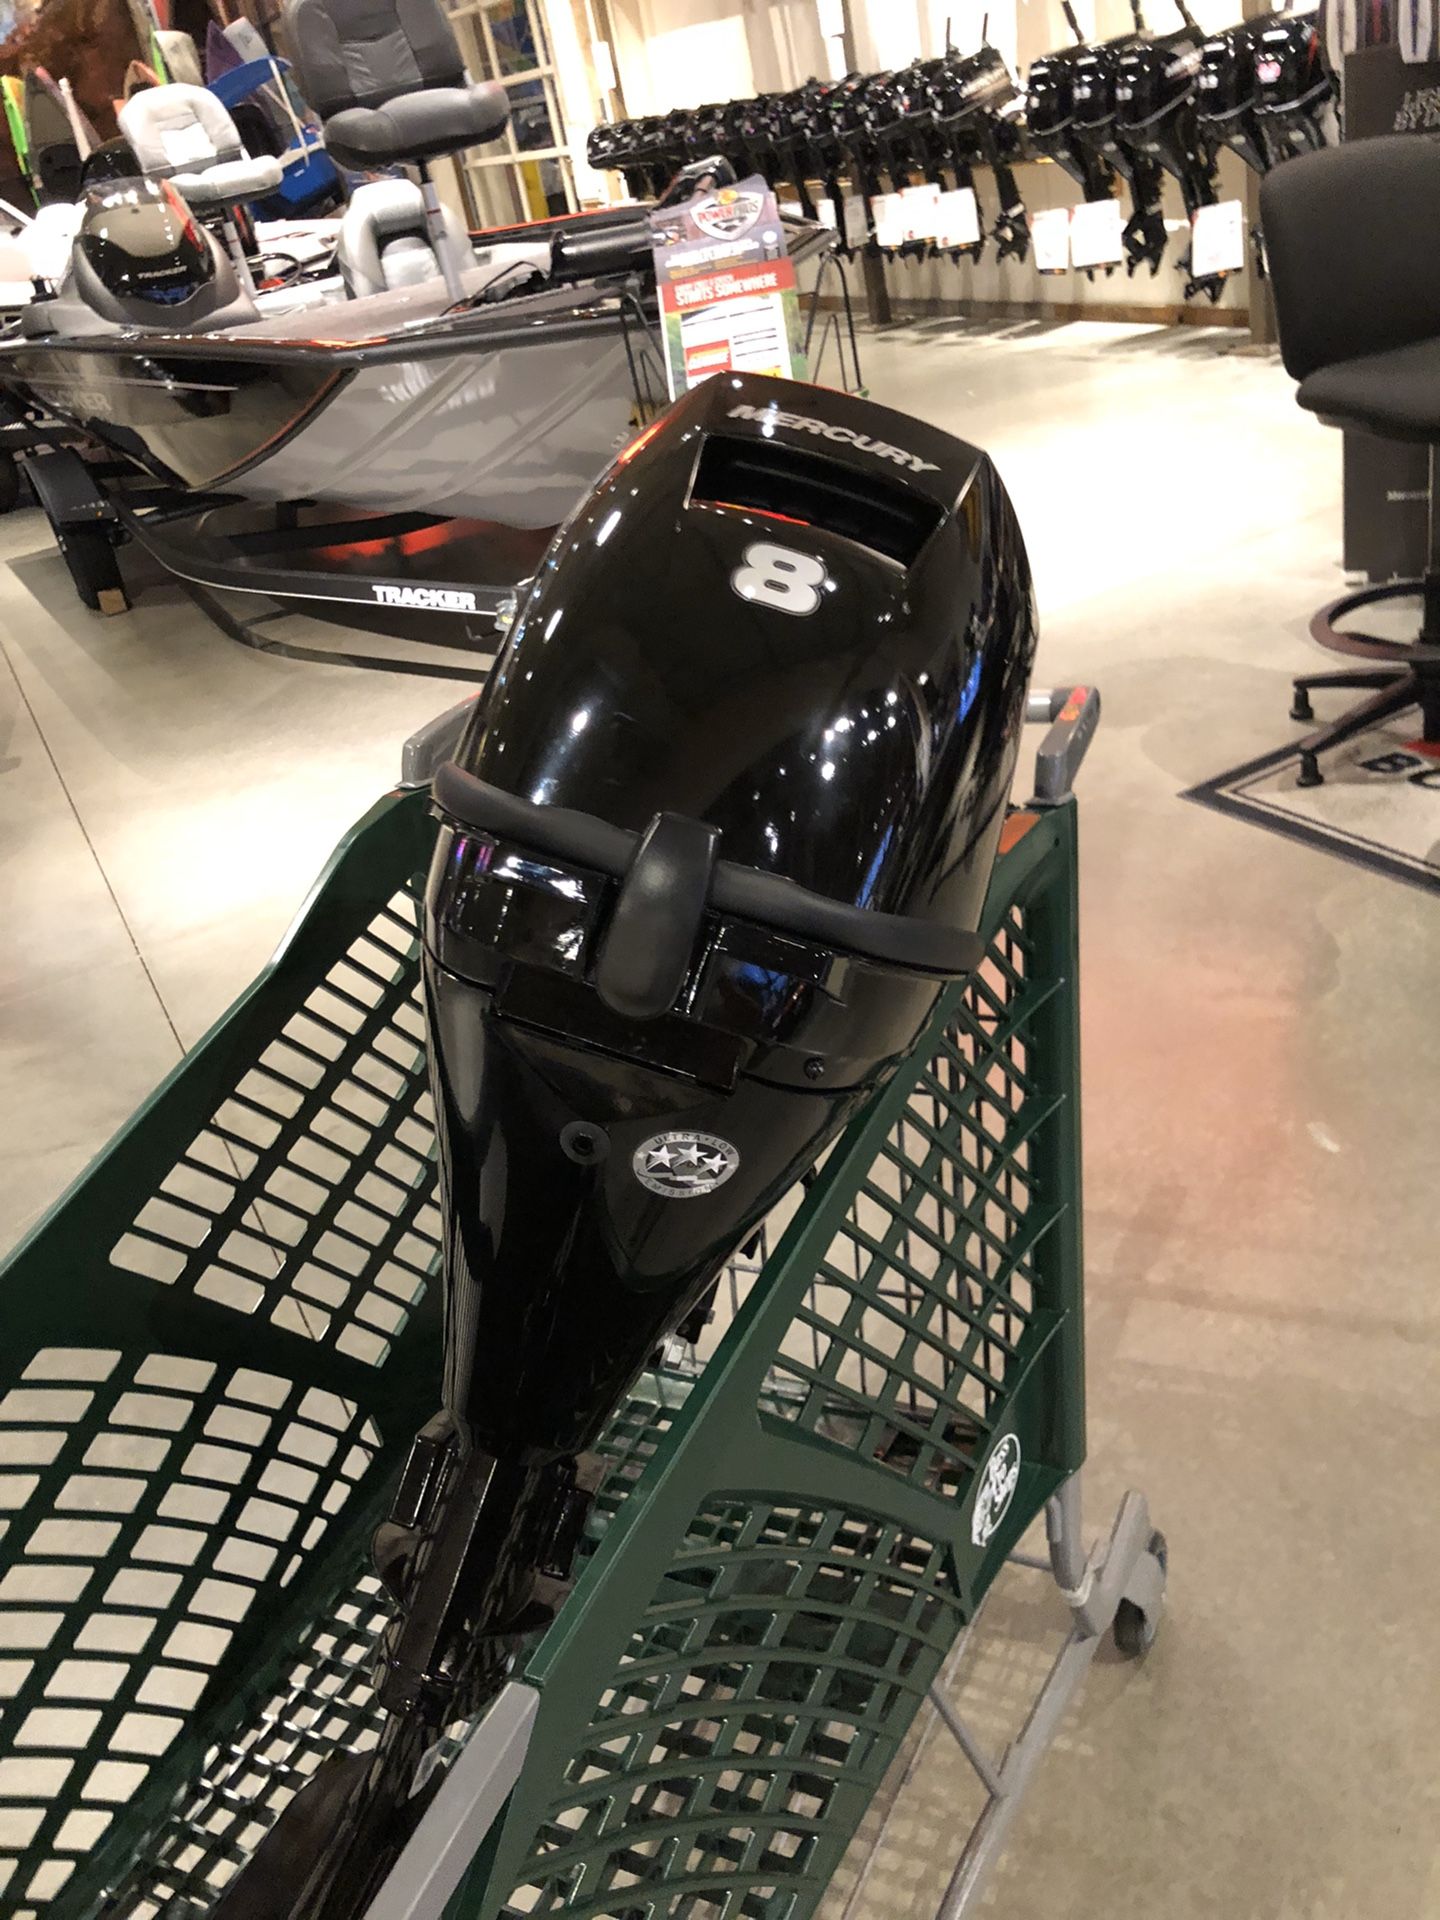 2019 Mercury 8hp Outboard. Brand new